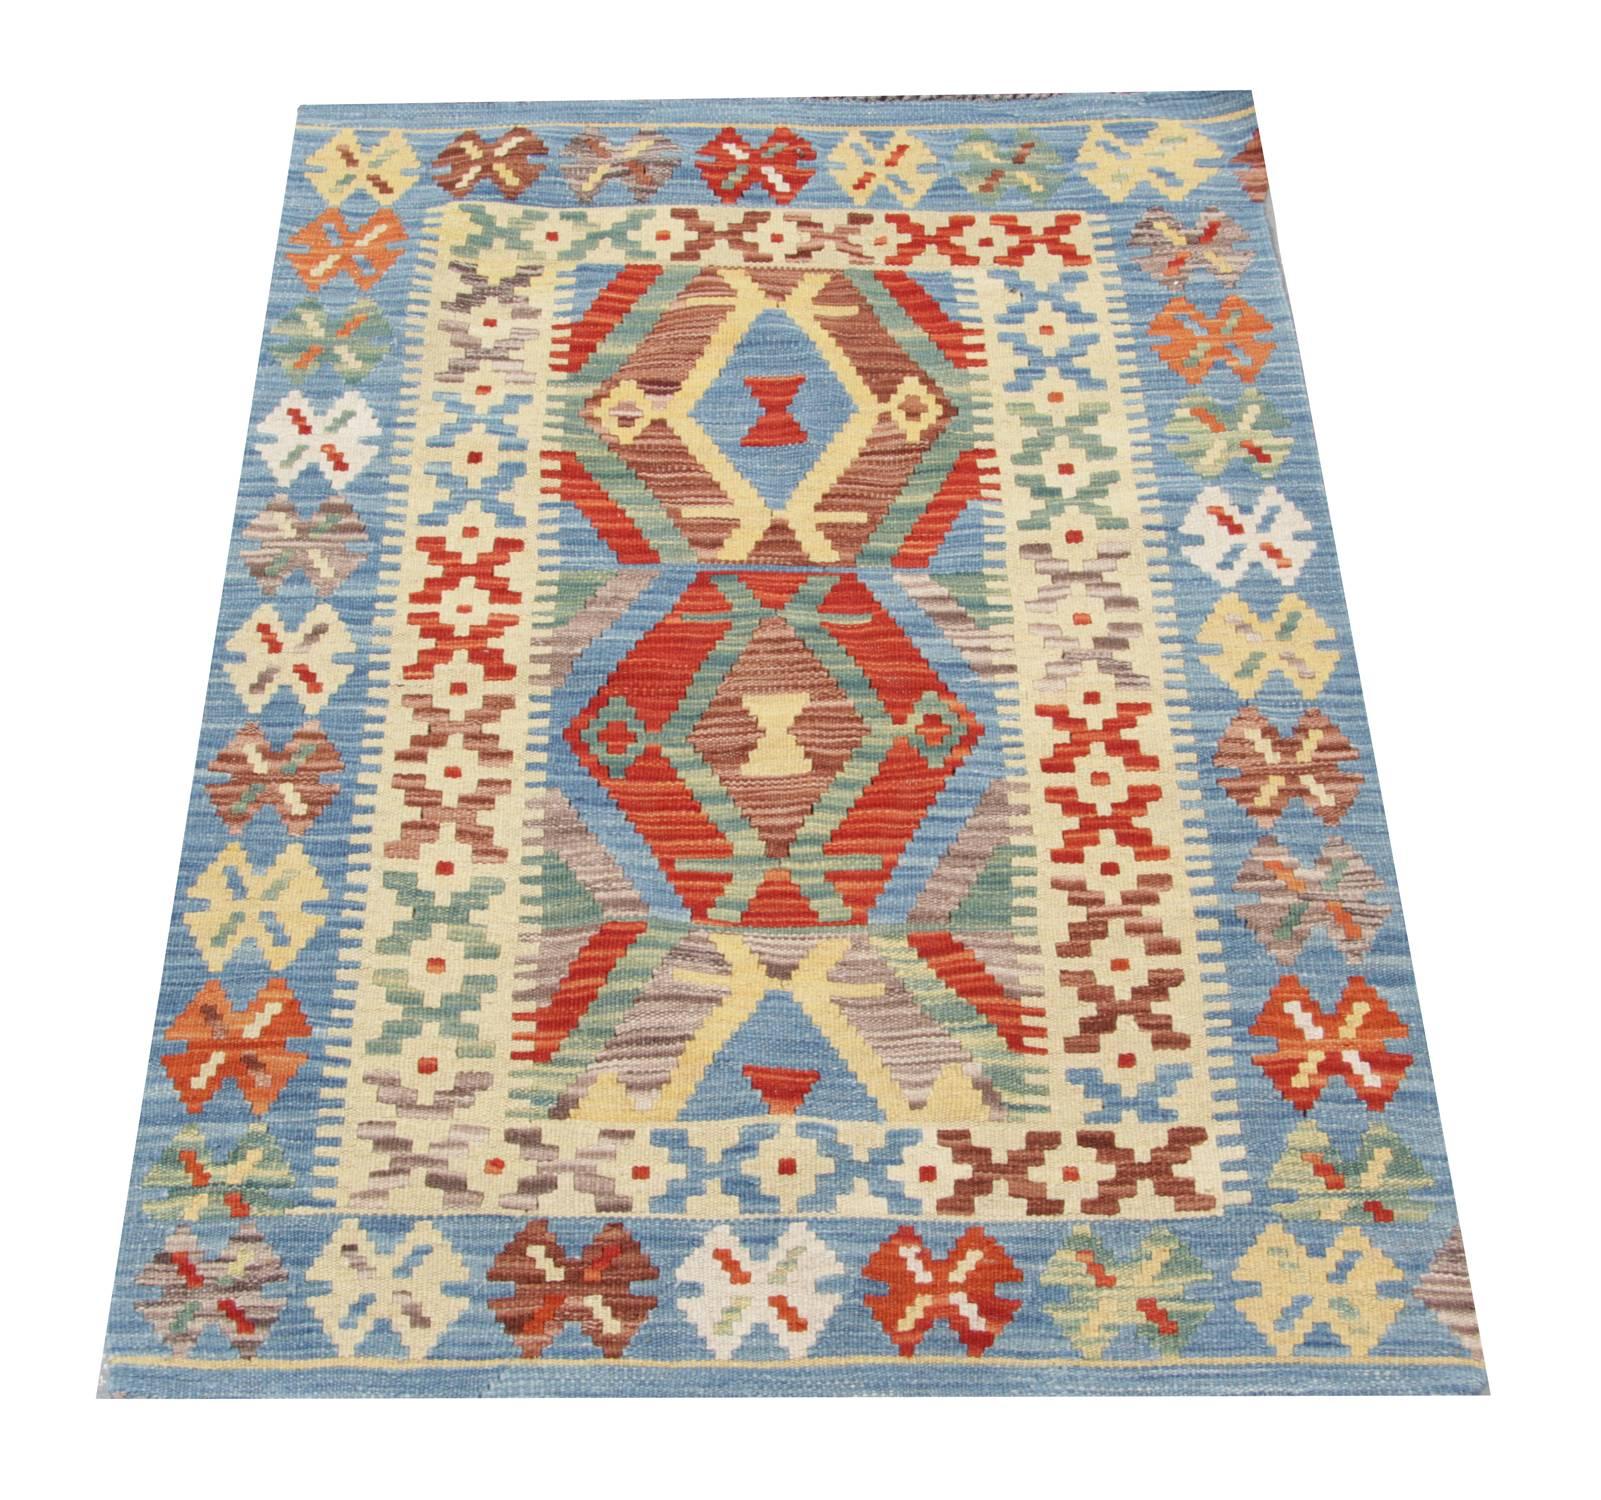 This flat weave rug has been handmade in the North of Afghanistan by Uzbek and Turkmen tribes by using local wool and cotton. The quality of the woven rug is enhanced by the use of organic dyes. The geometric rug shows a tribal rug design deriving